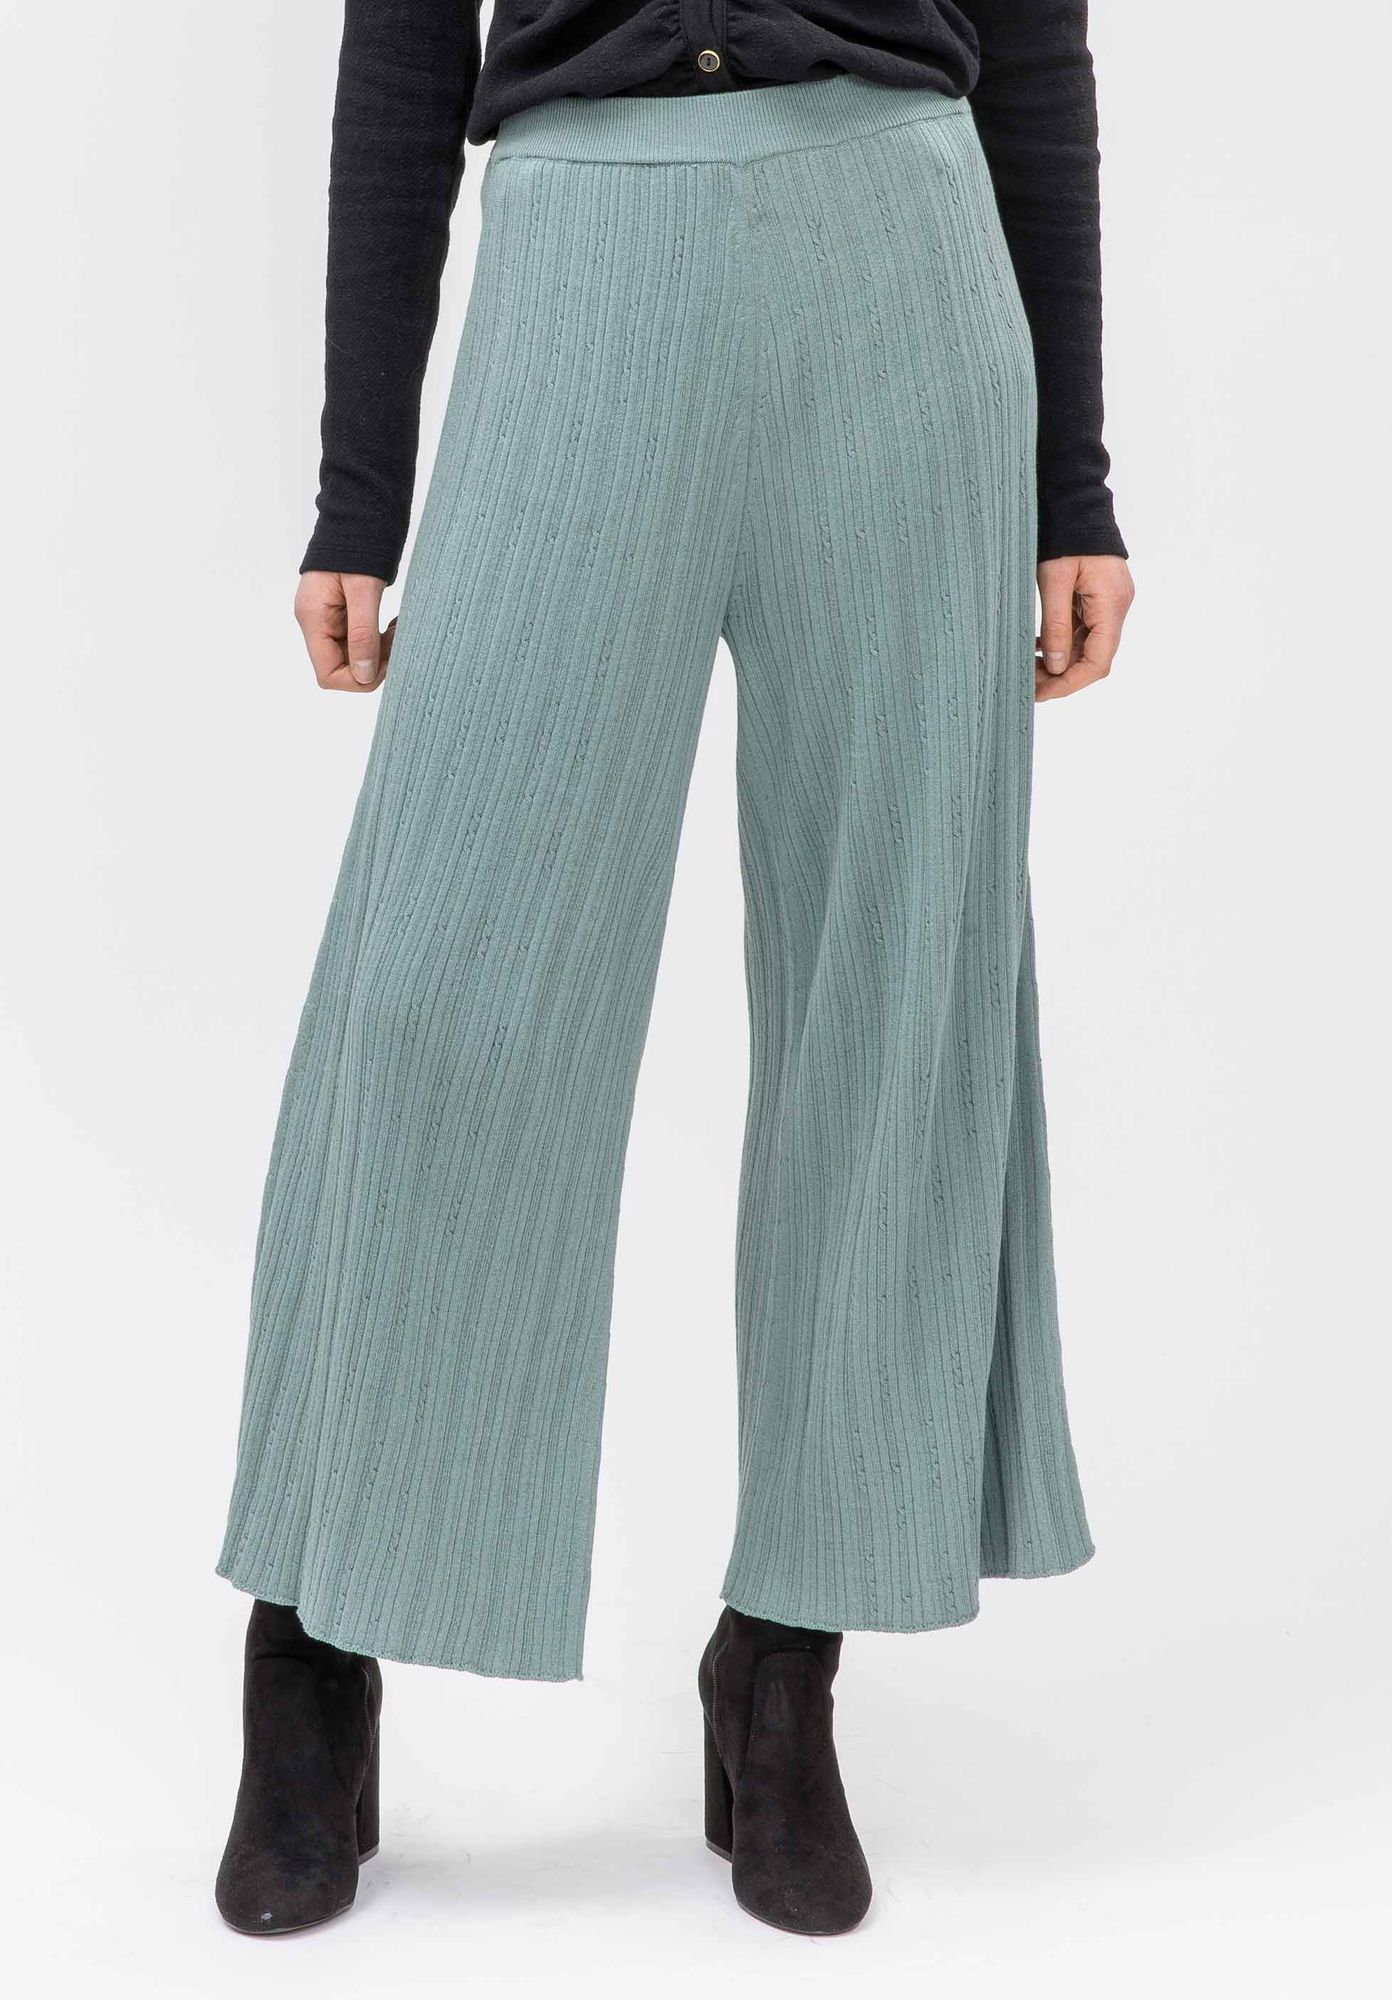 LATHI trousers in culotte shape in antique green by LOVJOI made from organic cotton